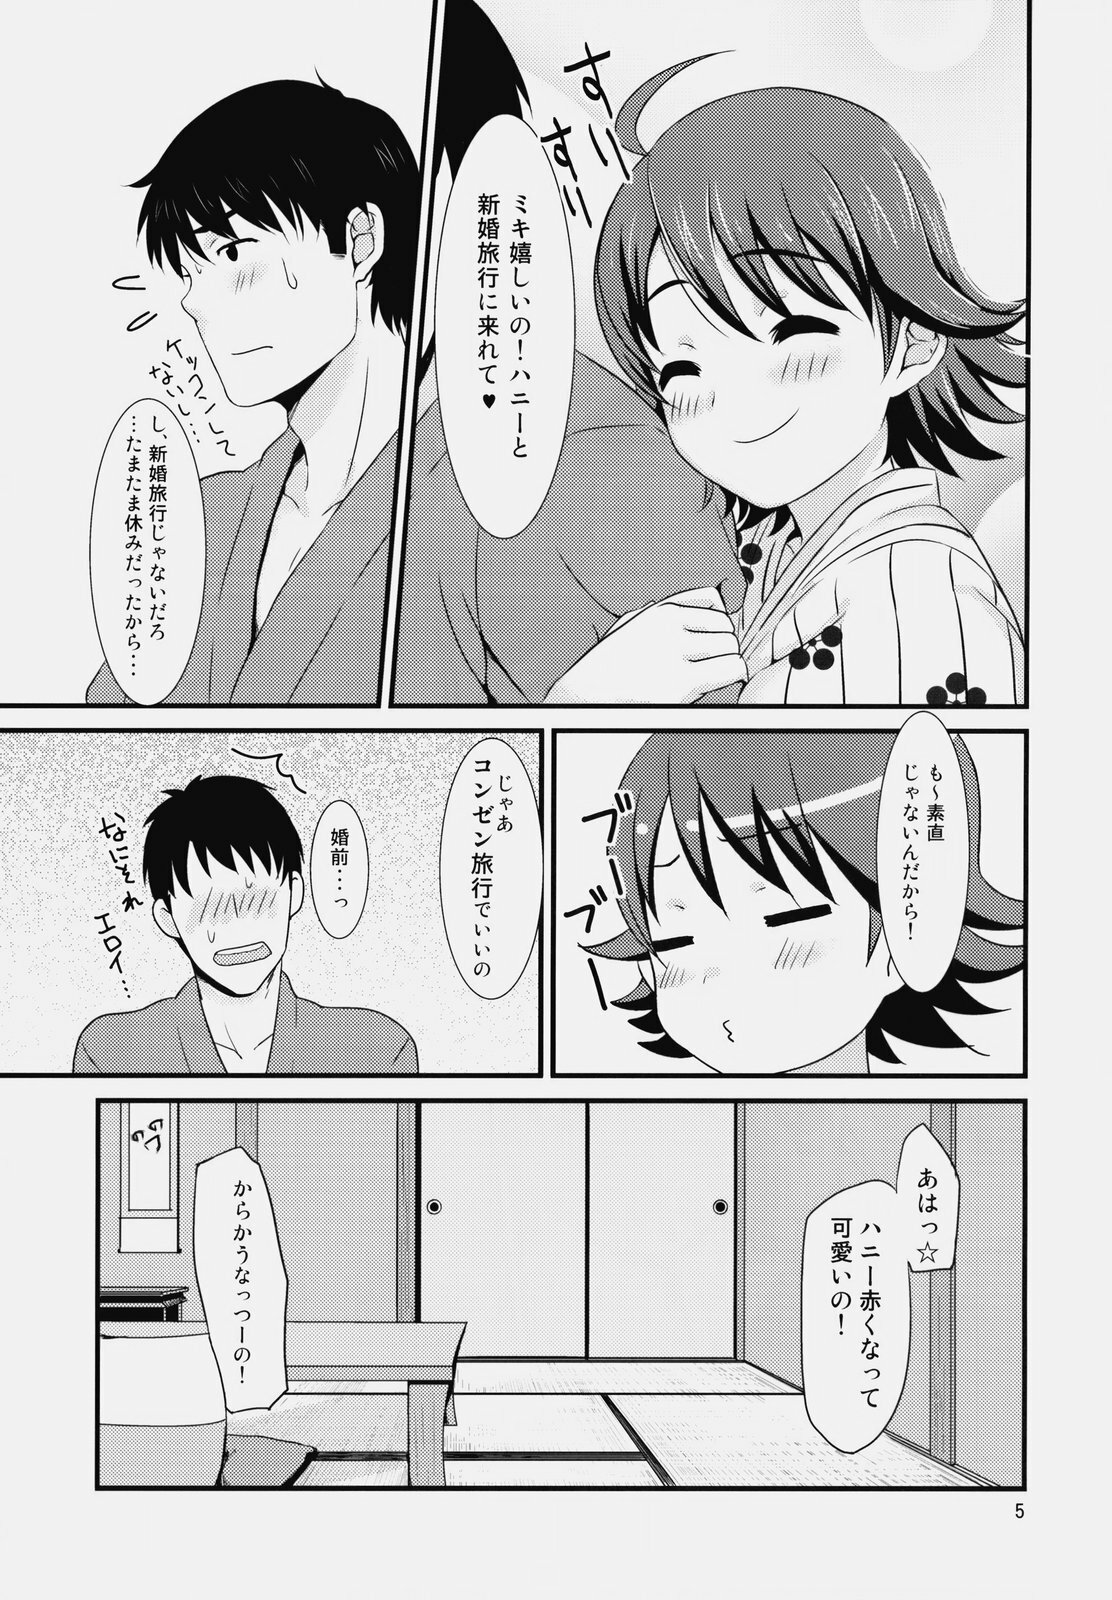 (Appeal For you!!) [Iorigumi (Tokita Alumi)] traveling (THE IDOLM@STER) page 4 full